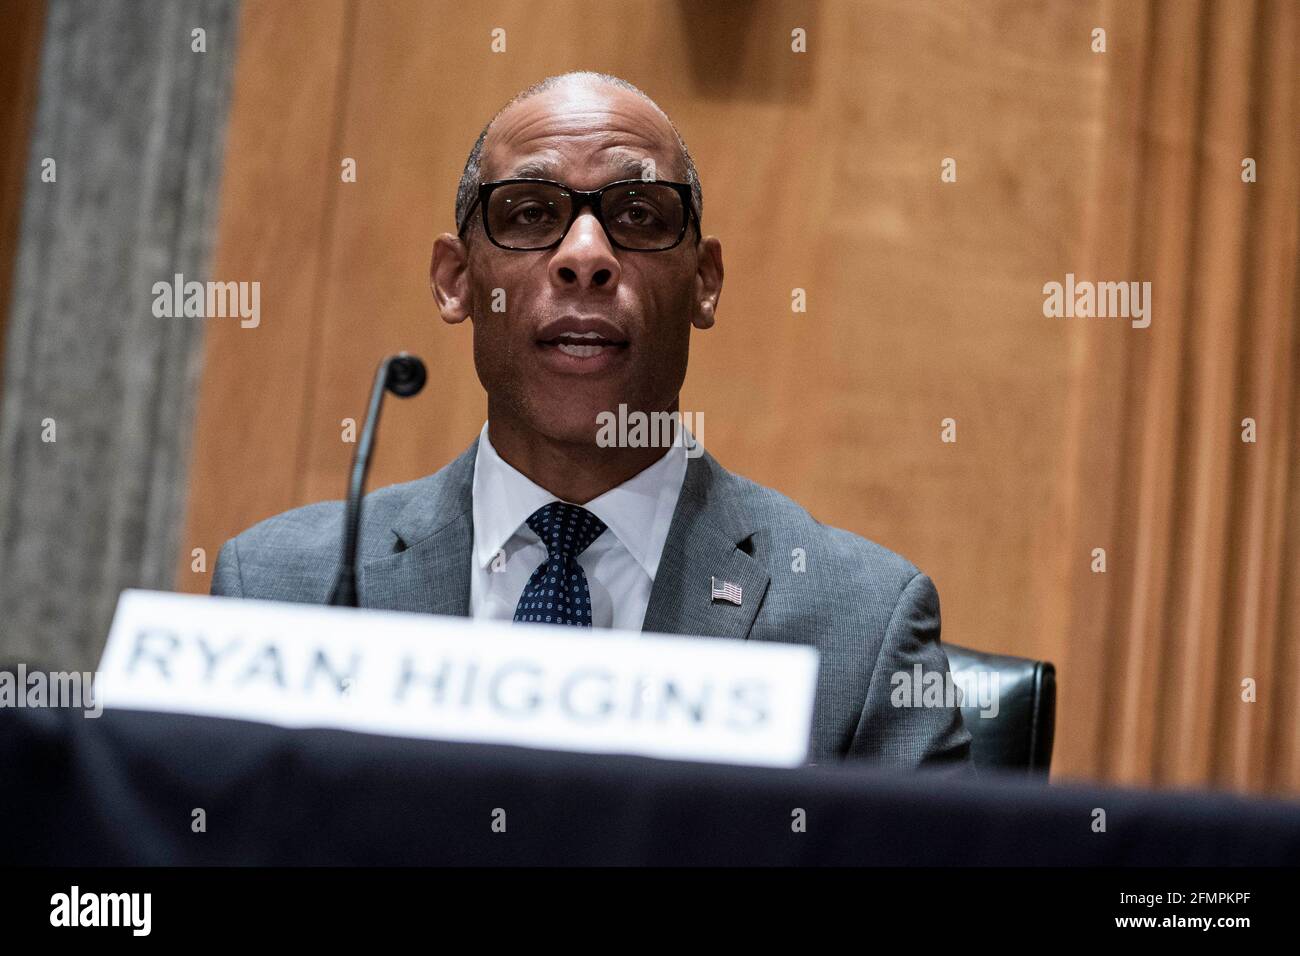 Washington, USA. 11th May, 2021. Ryan Higgins, chief information security officer at the U.S. Department of Commerce, speaks during a Senate Homeland Security and Governmental Affairs Committee hearing in Washington, DC, U.S., on Tuesday, May 11, 2021. The hearing is titled 'Prevention, Response, and Recovery: Improving Federal Cybersecurity Post-SolarWinds.' (Photo by Sarah Silbiger/Pool/Sipa USA) Credit: Sipa USA/Alamy Live News Stock Photo